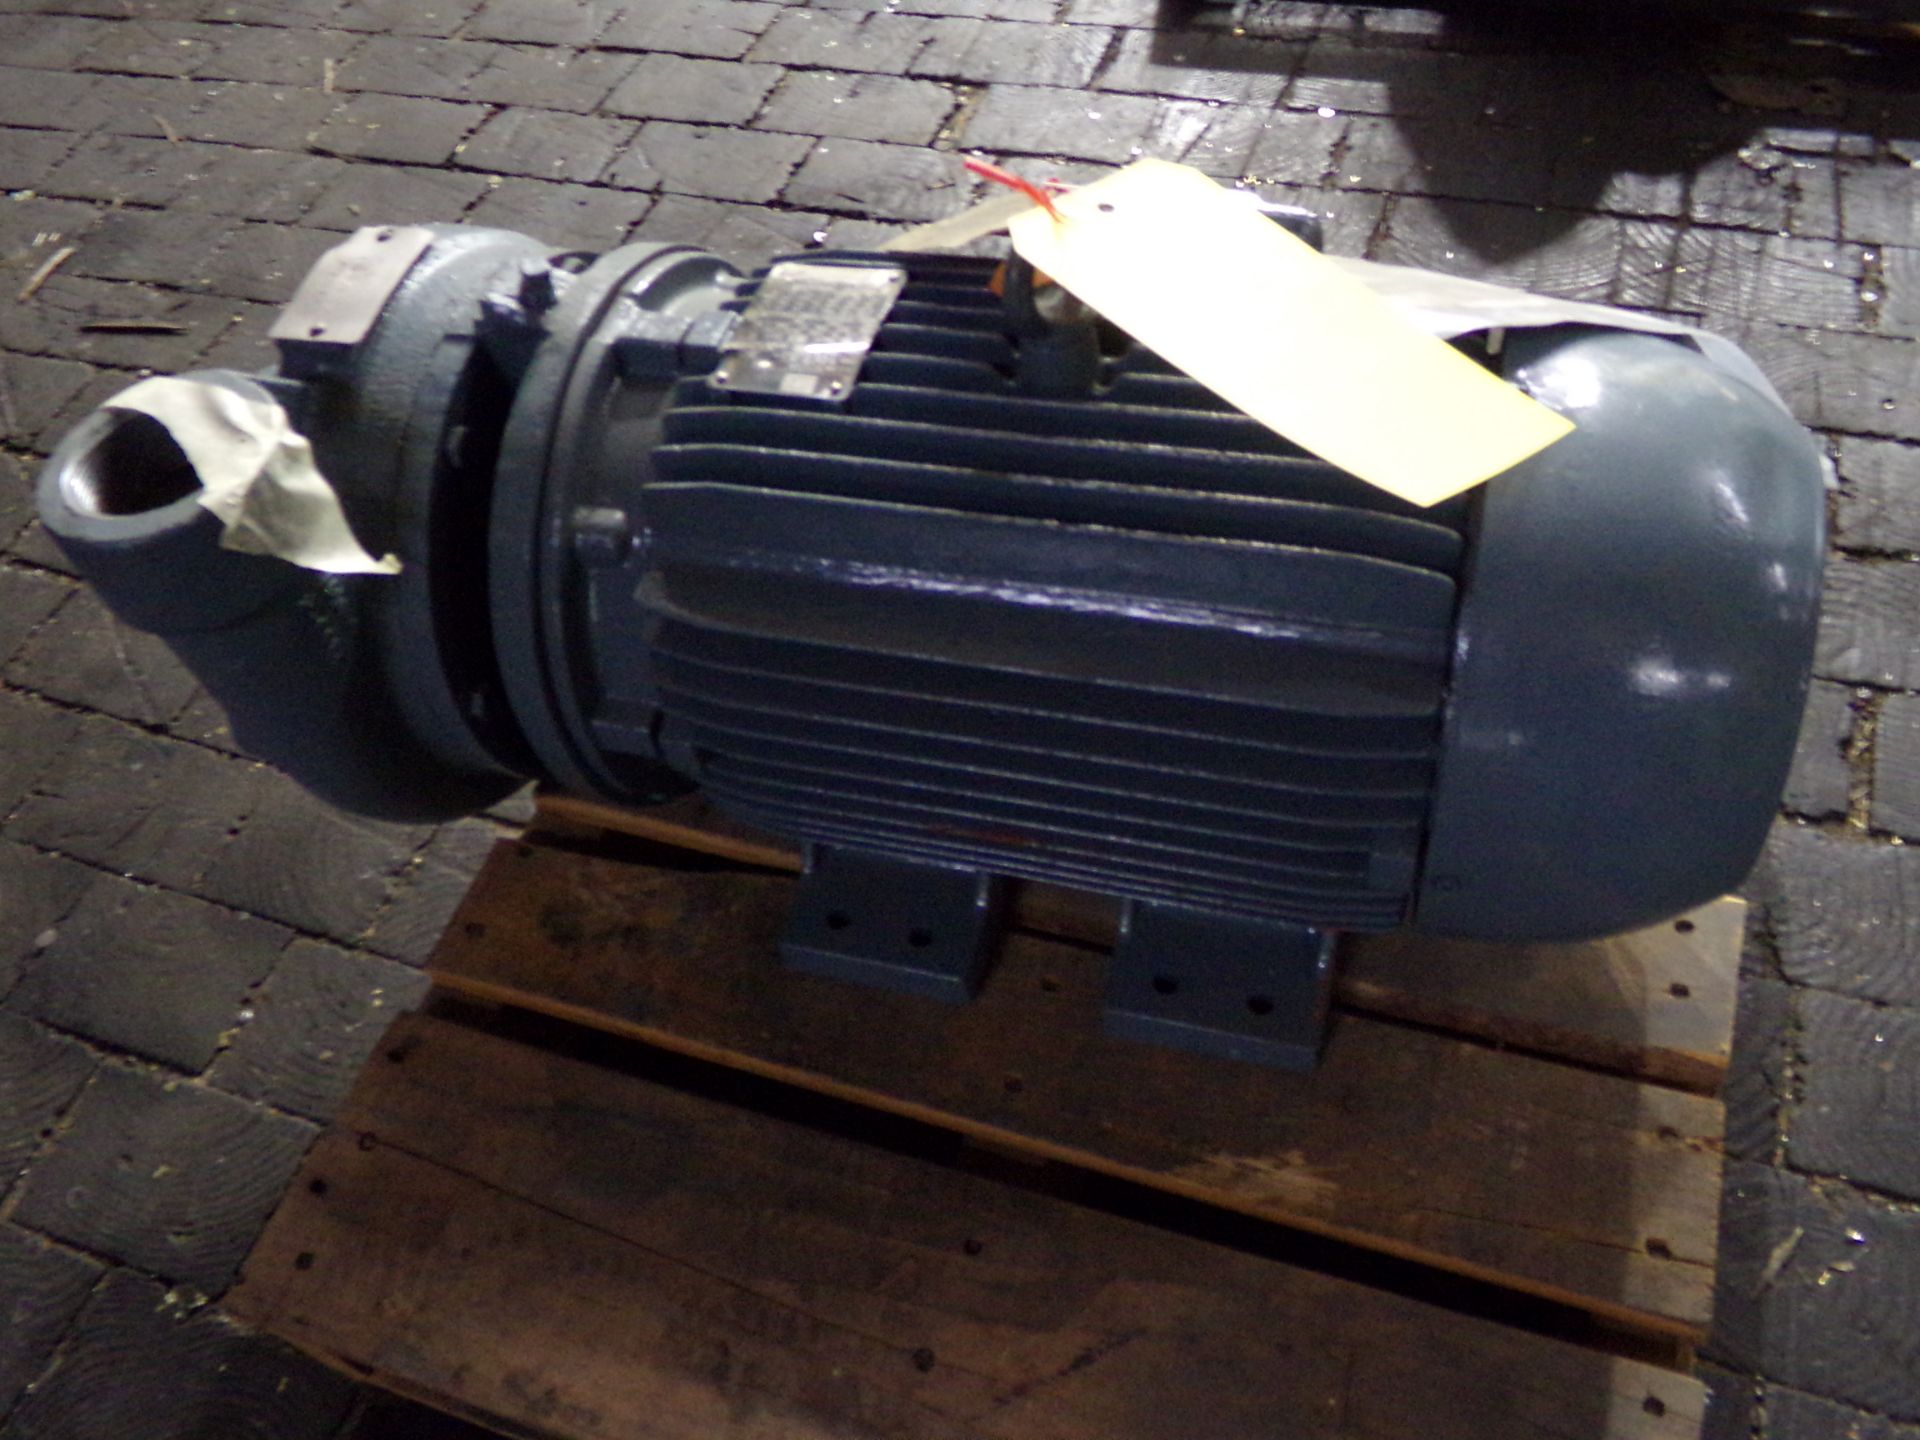 WEG ELECTRIC MOTOR 10HP 60 HZ 3475 RPM W213/5JM FRAME WITH PACO PUMP ATTACHED - Image 3 of 9